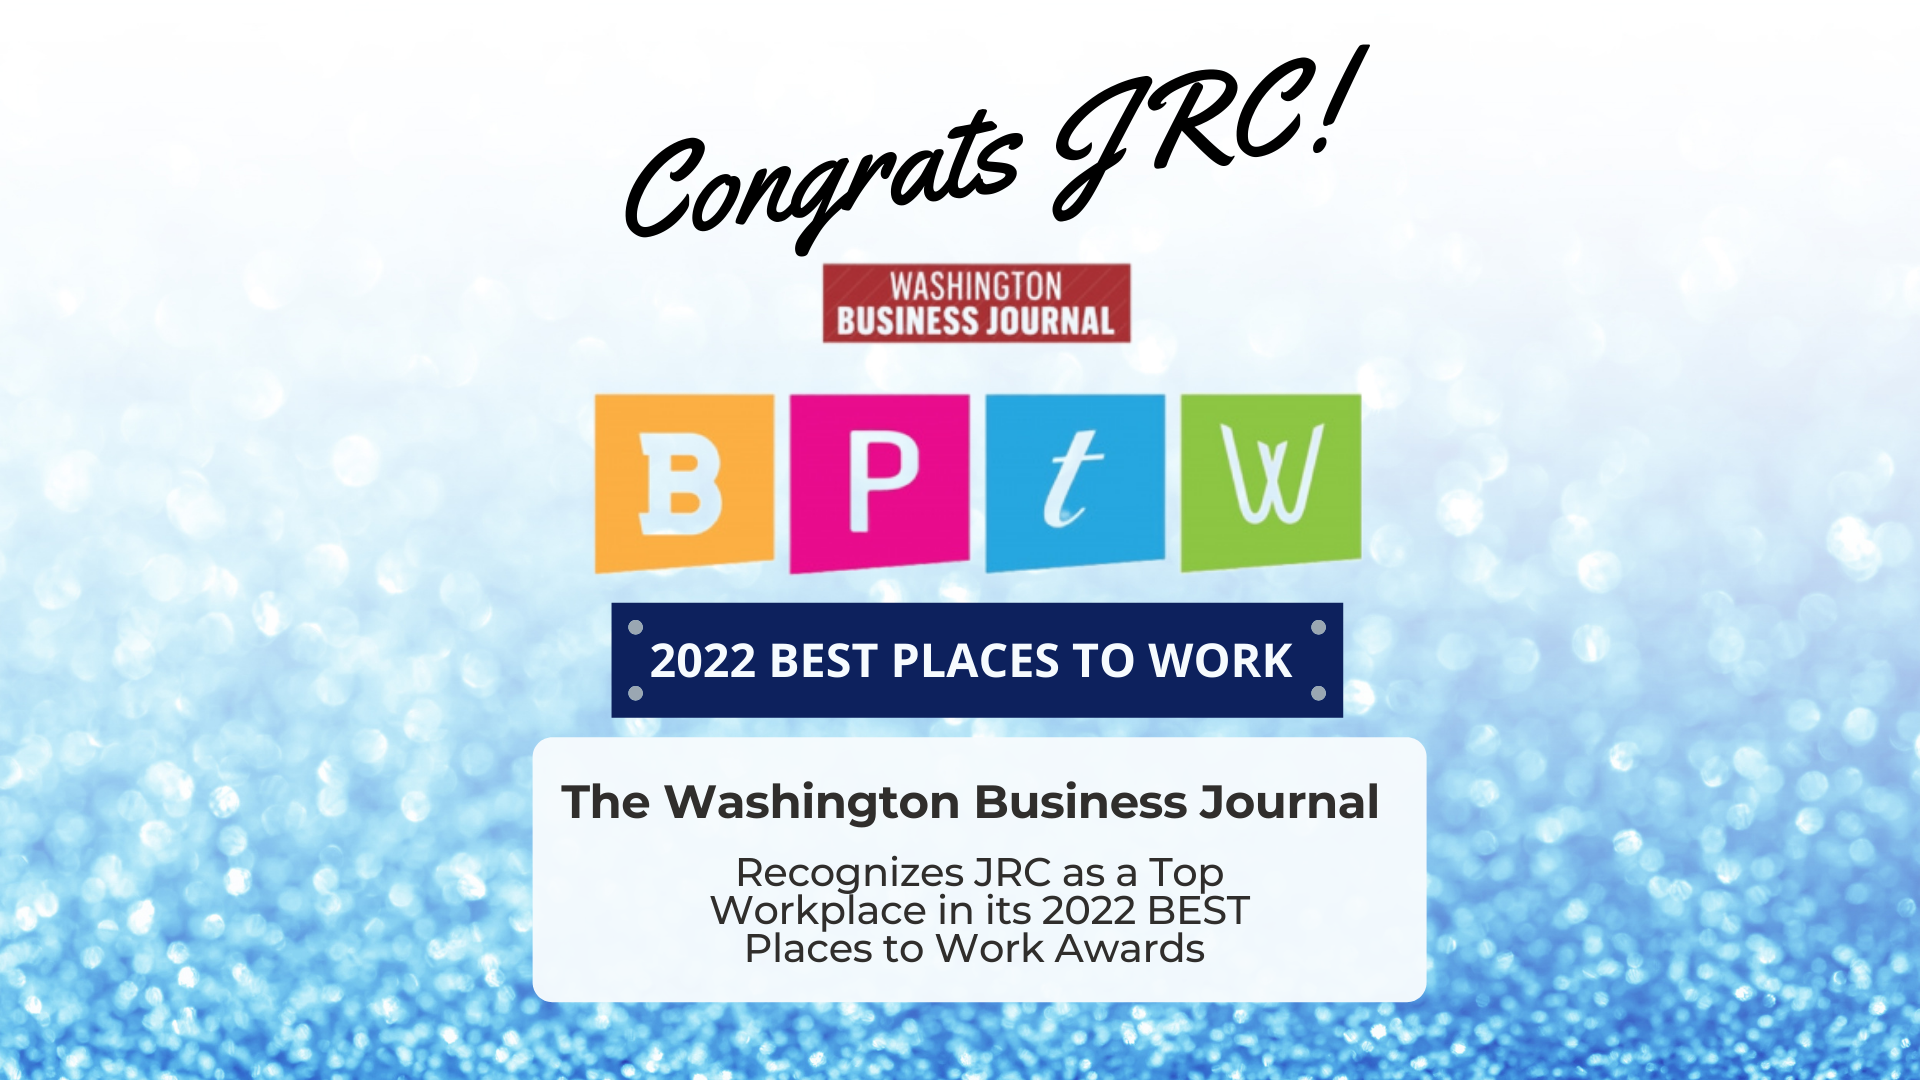 THE WASHINGTON BUSINESS JOURNAL RECOGNIZES JRC AS ONE OF THE BEST PLACES TO WORK IN THE GREATER WASHINGTON AREA